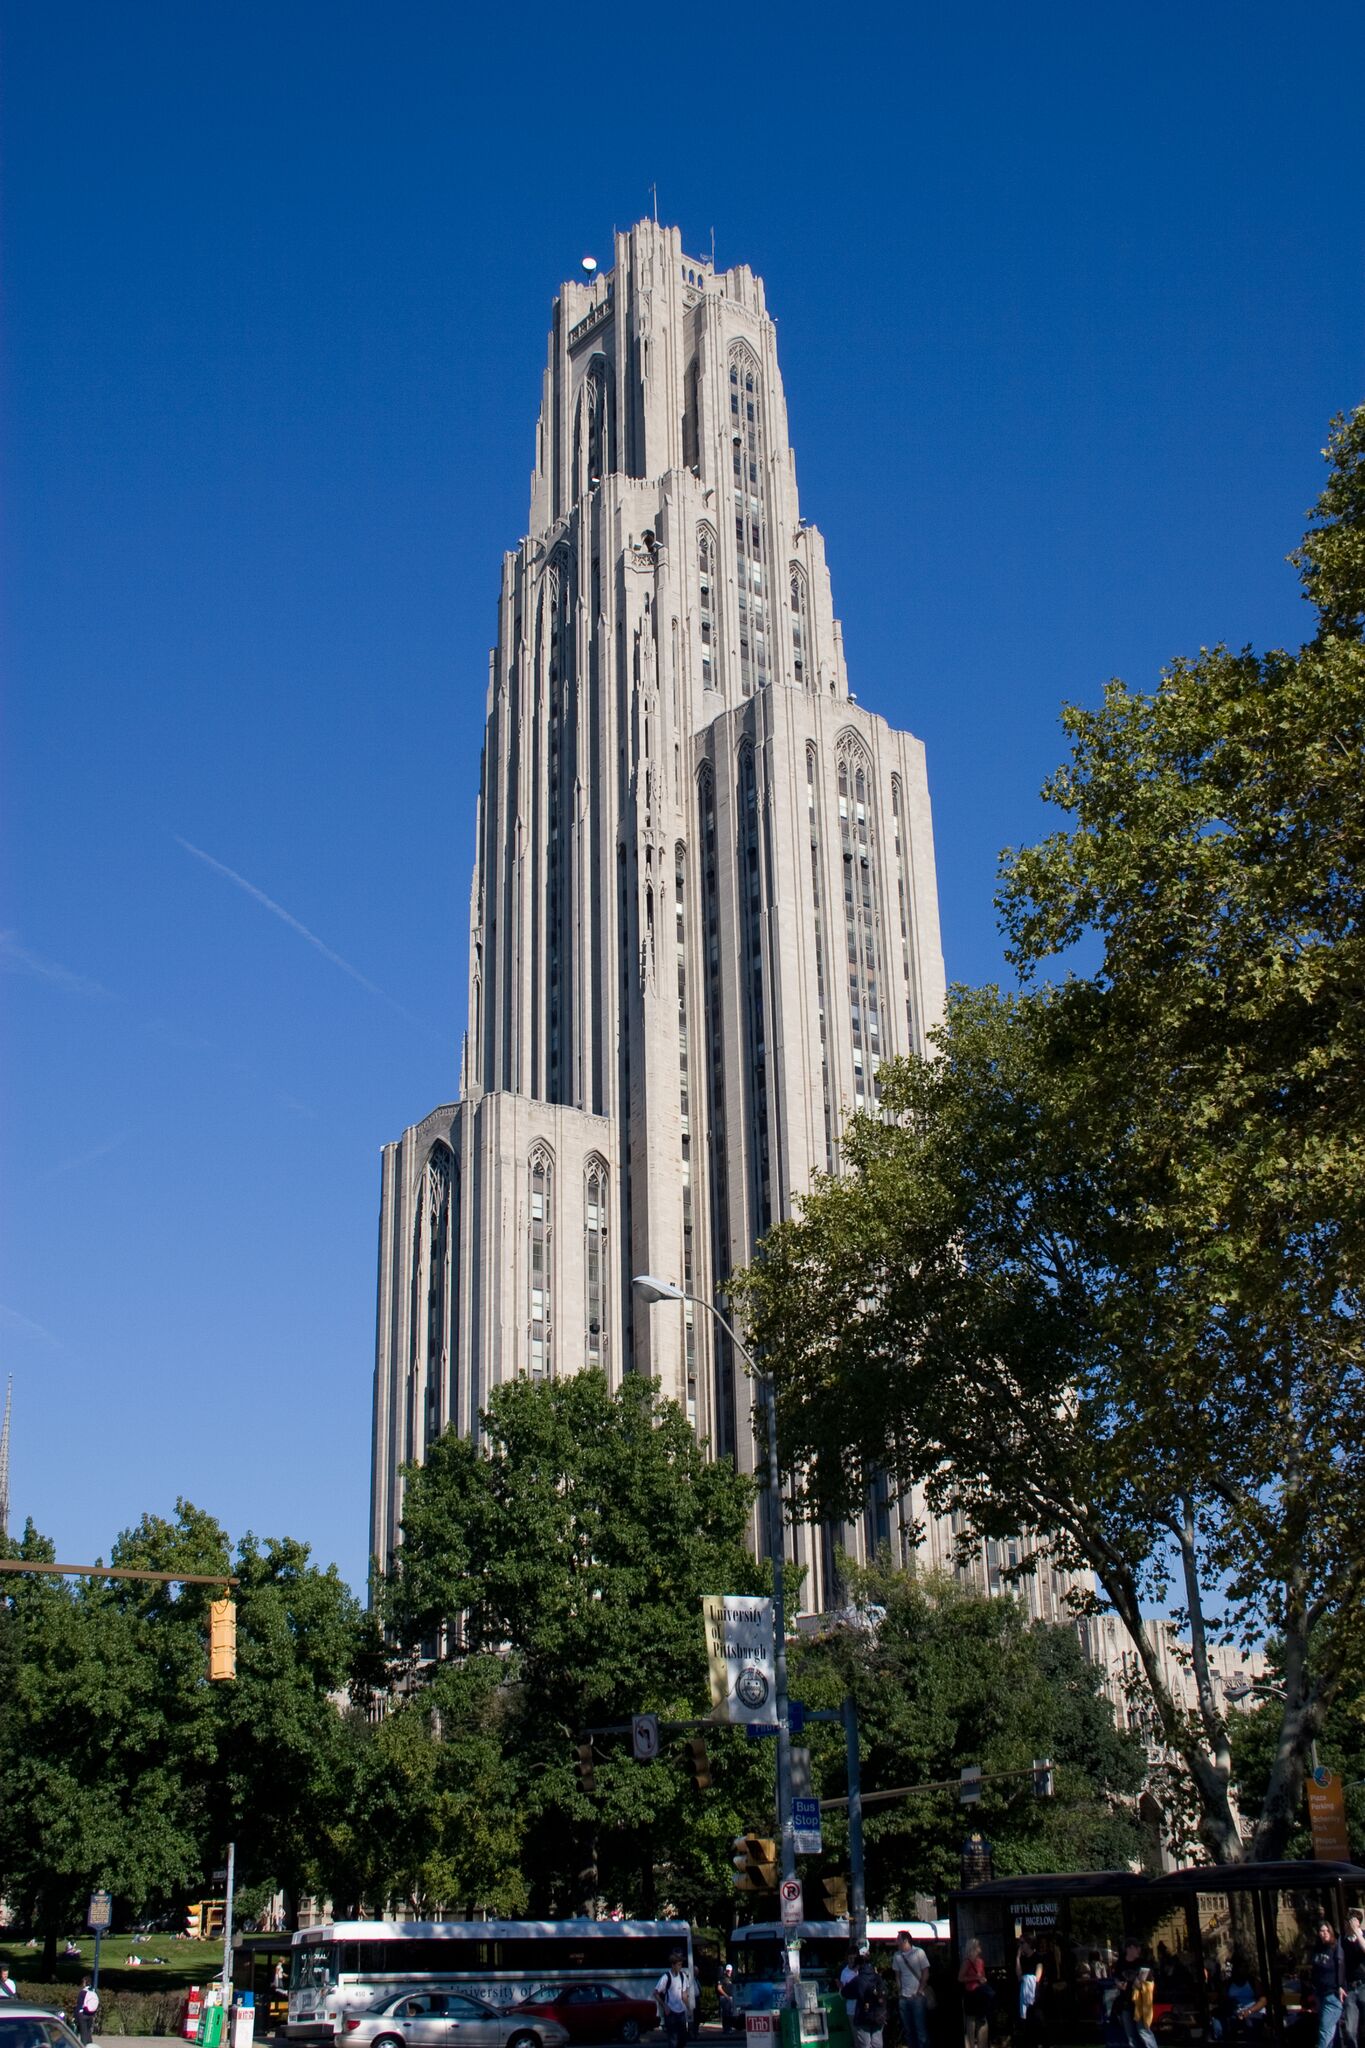 Cathedral of Learning, Oakland. Pittsburgh, PA. Photo taken by Dr. Neal Ryan. 